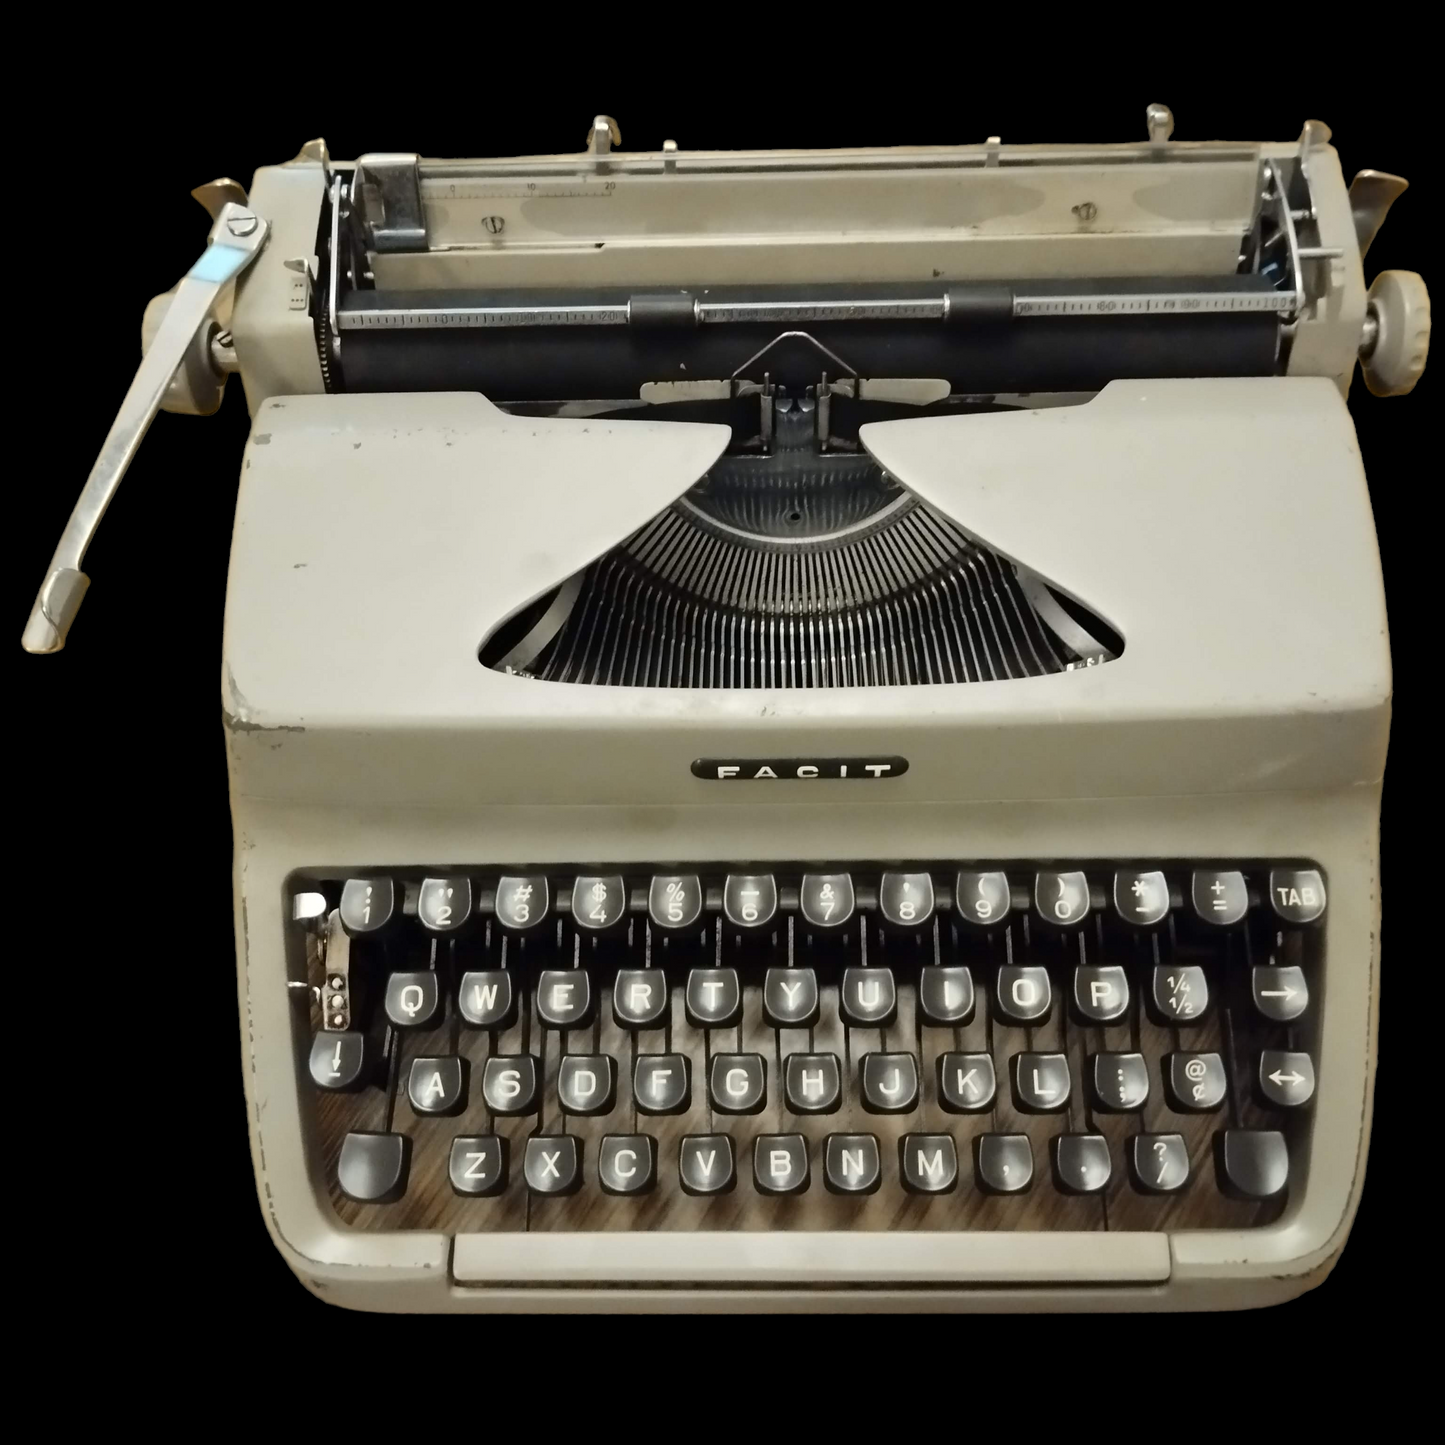 Image of Facit Typewriter. Available from universaltypewritercompany.in